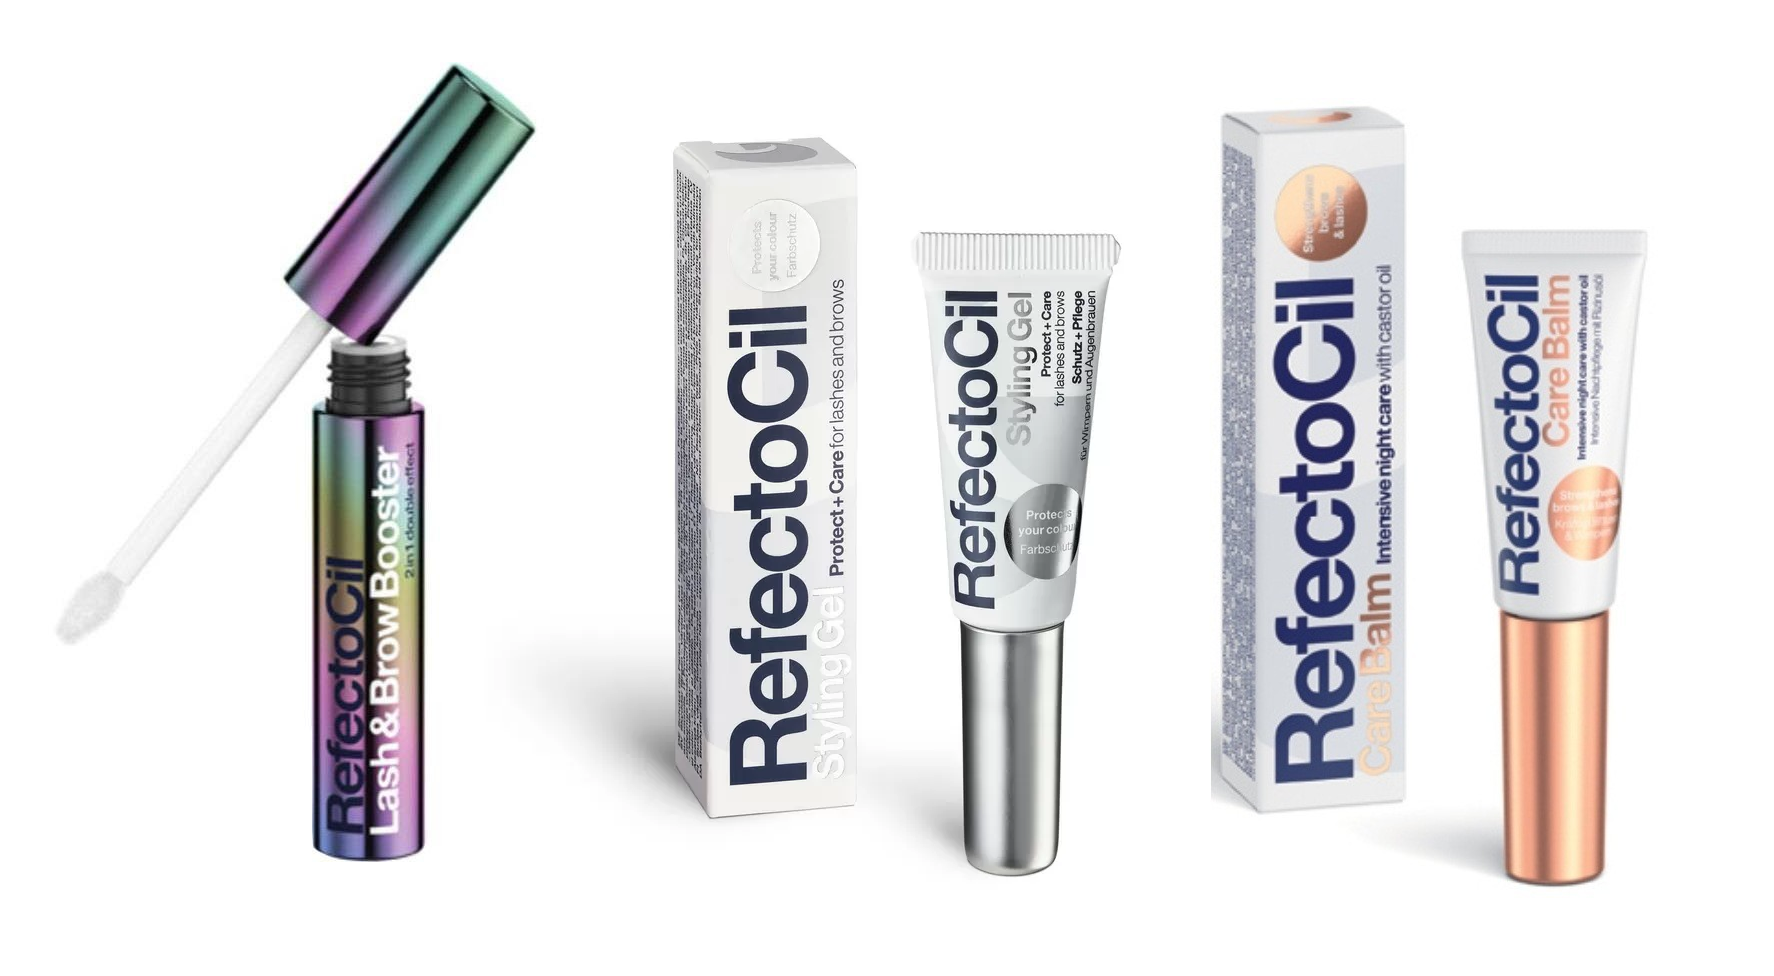 RefectoCil - Lash&Brow Booster + RefectoCil - Styling Gel + RefectoCil - Care balm - Skjønnhet